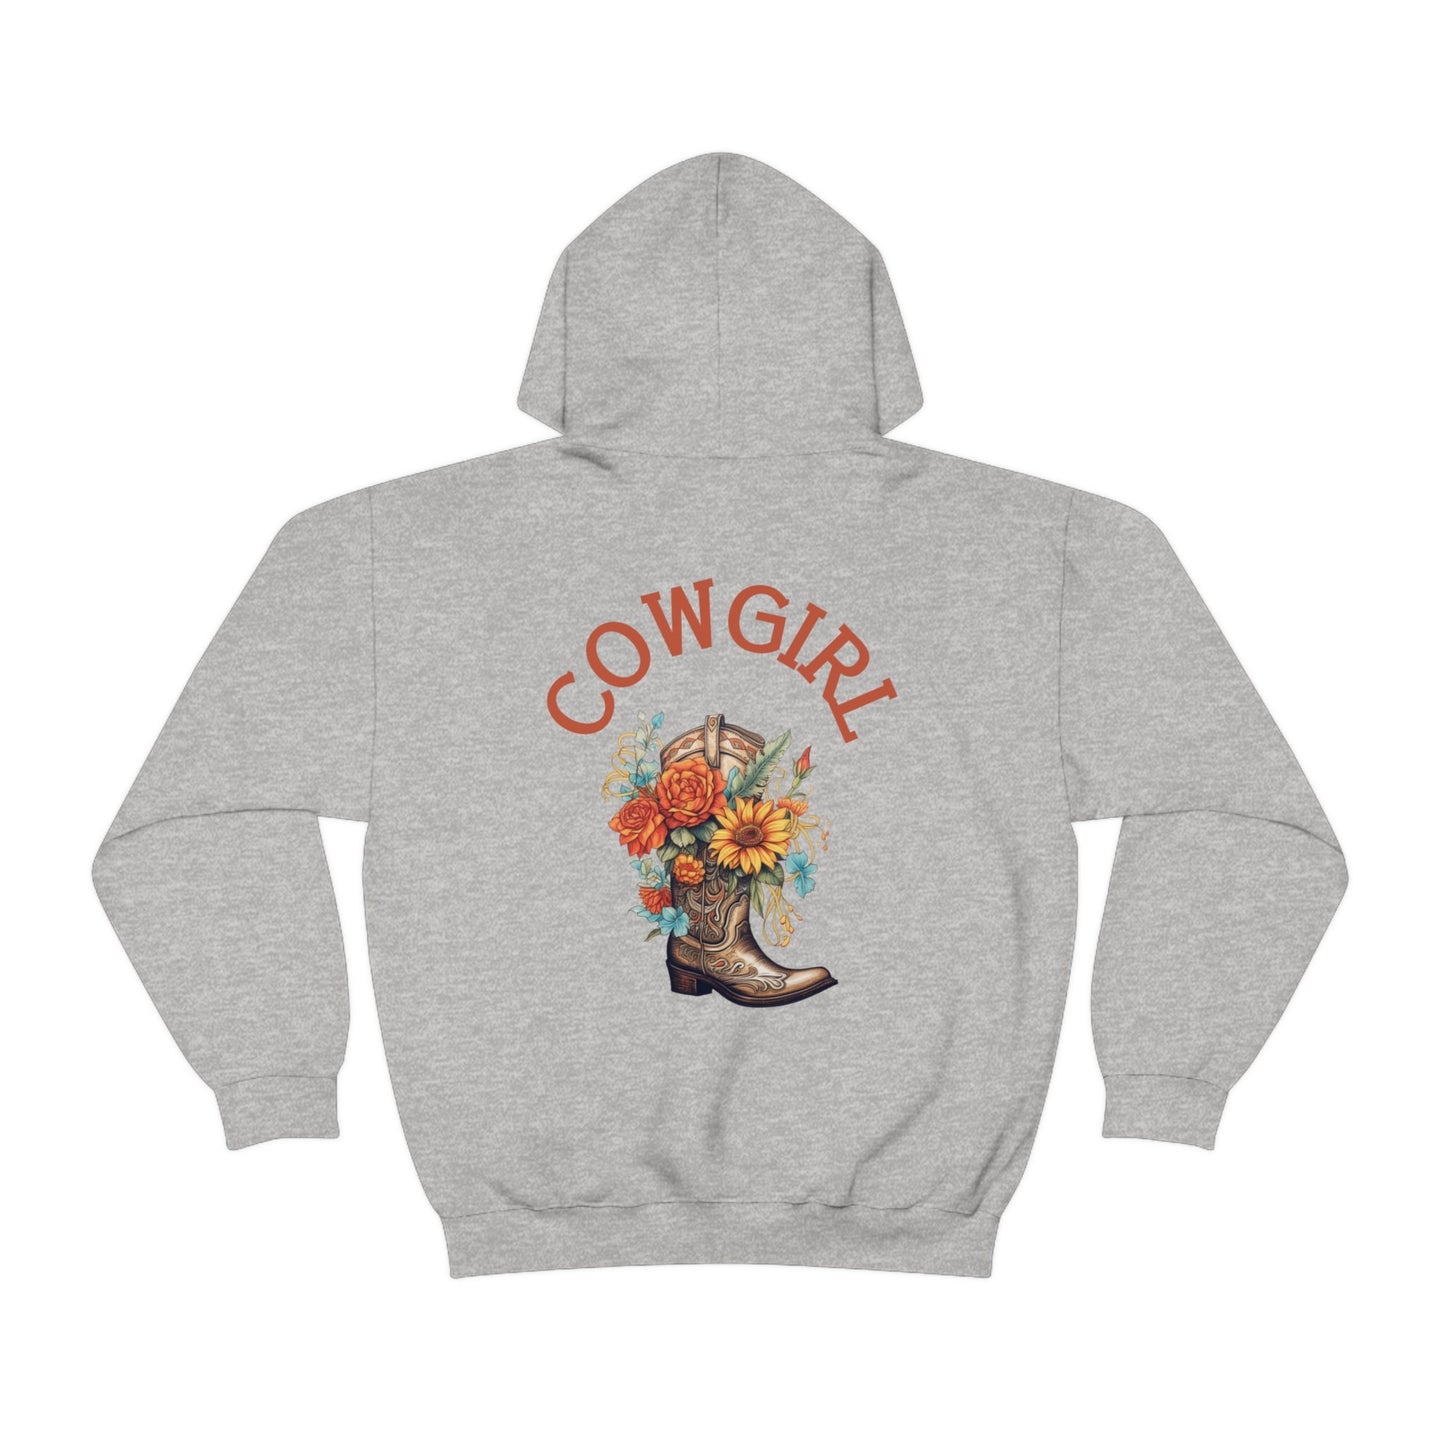 Cowgirl Boots Hoodie, Country Concert Sweatshirt, Western Graphic Hoodie for Women